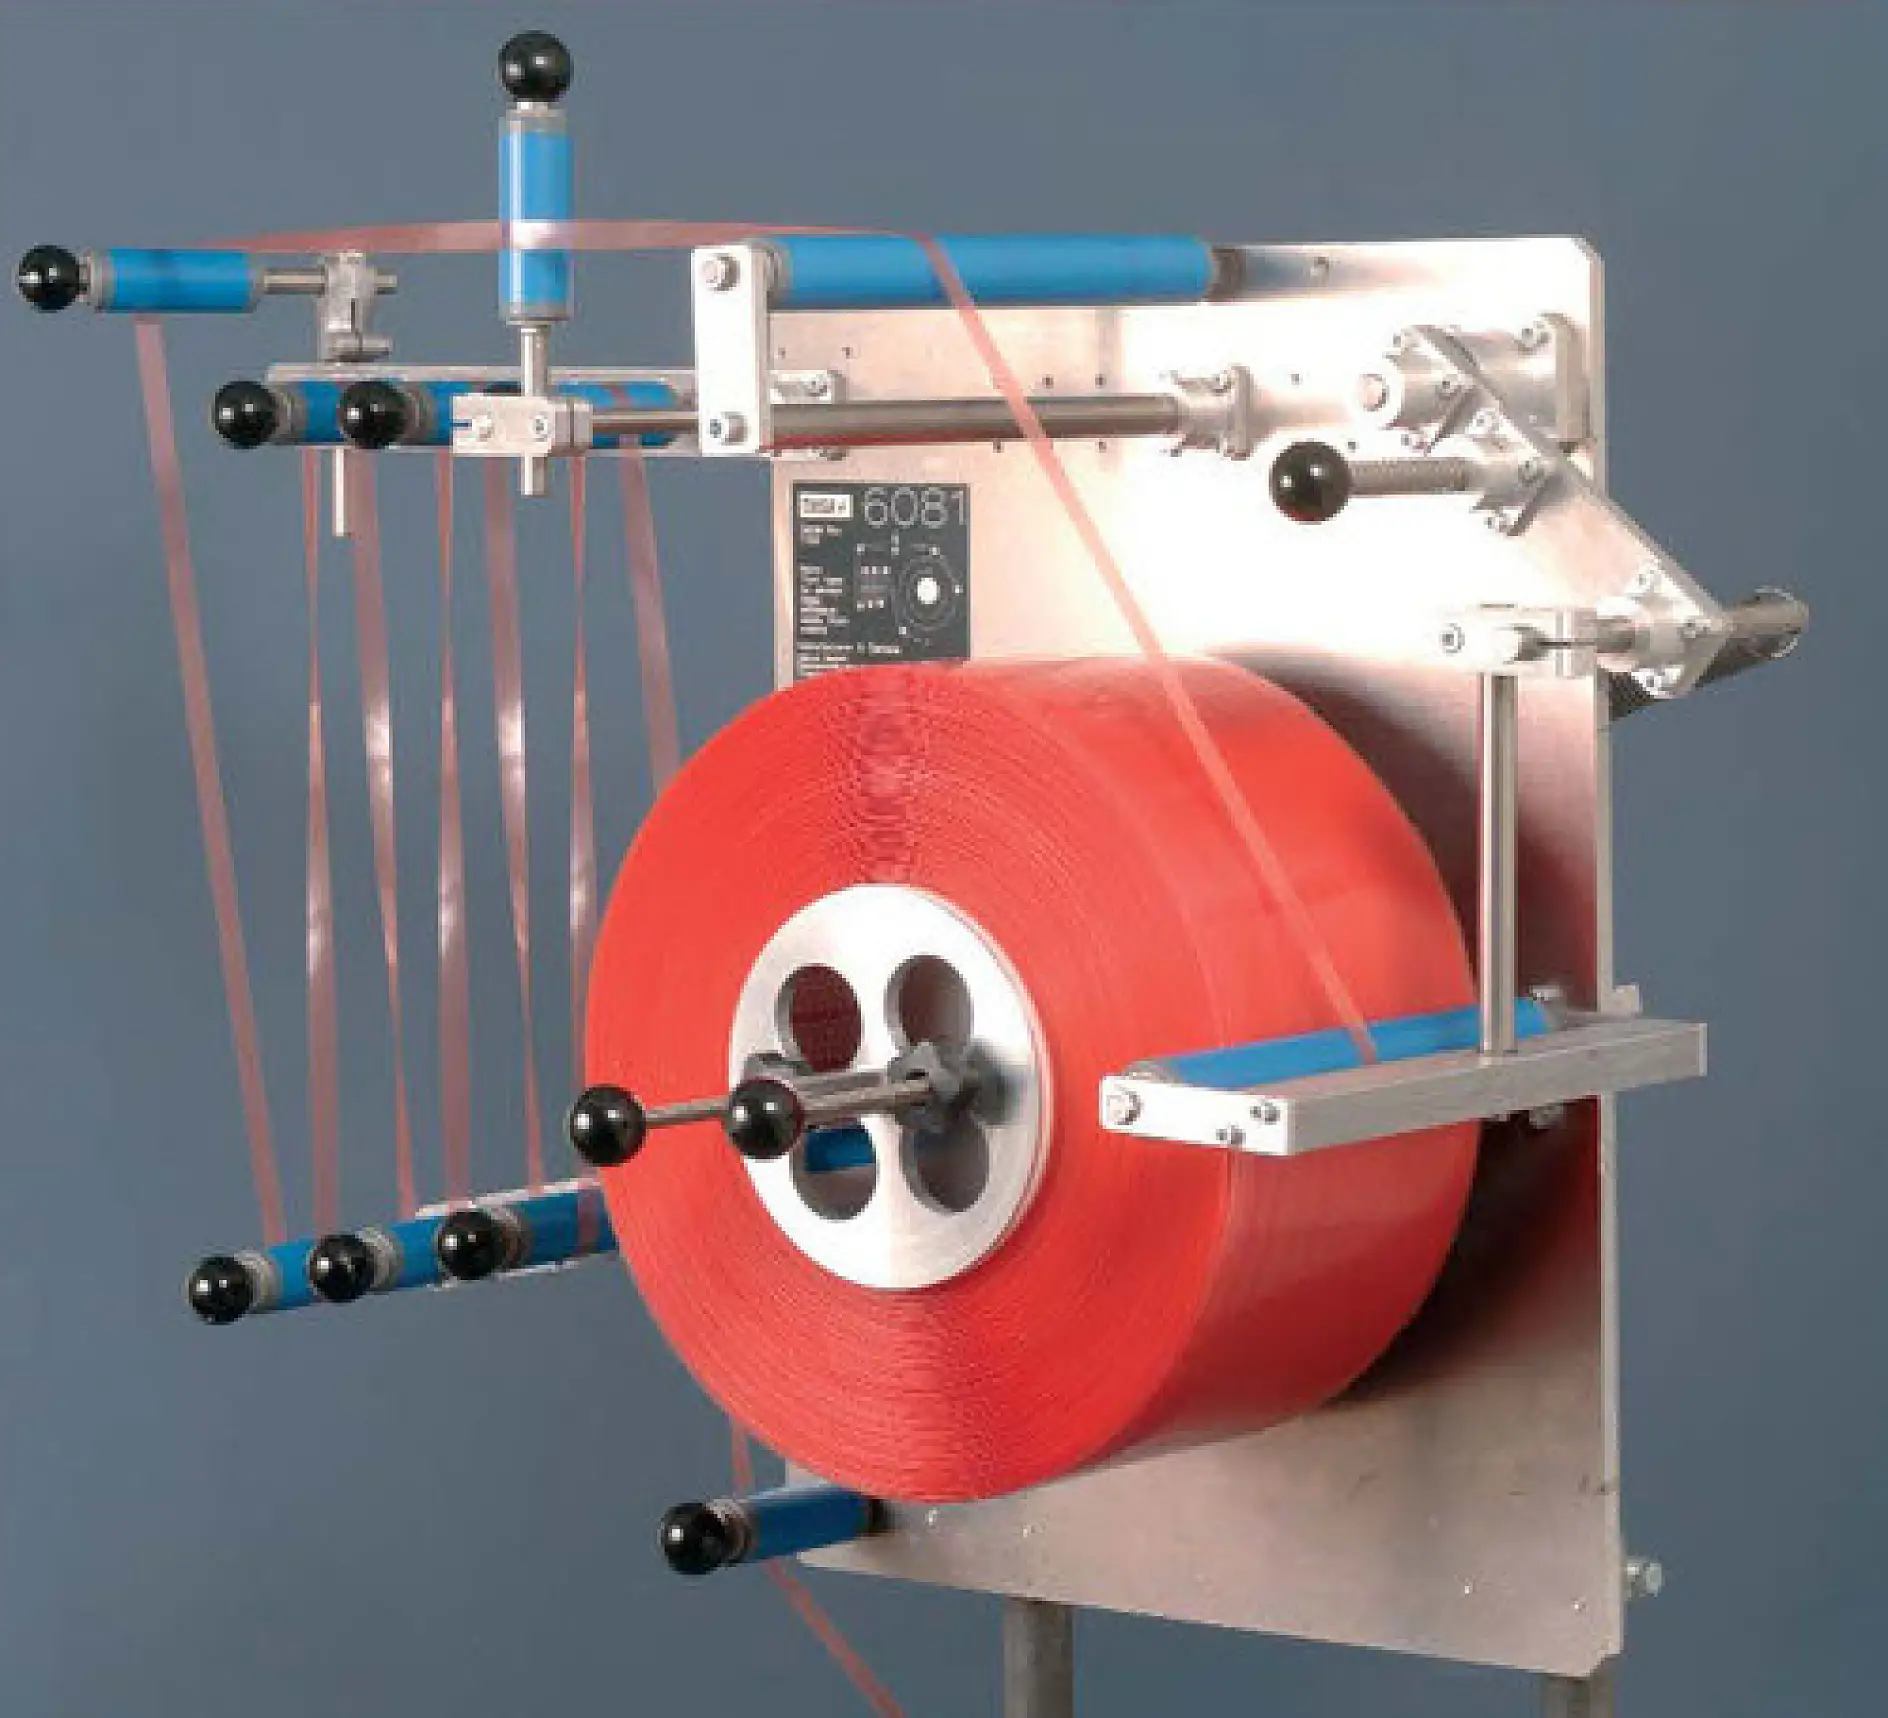 The tesa Spool Dispenser 6081 is developed for the easy integration into the packaging process.